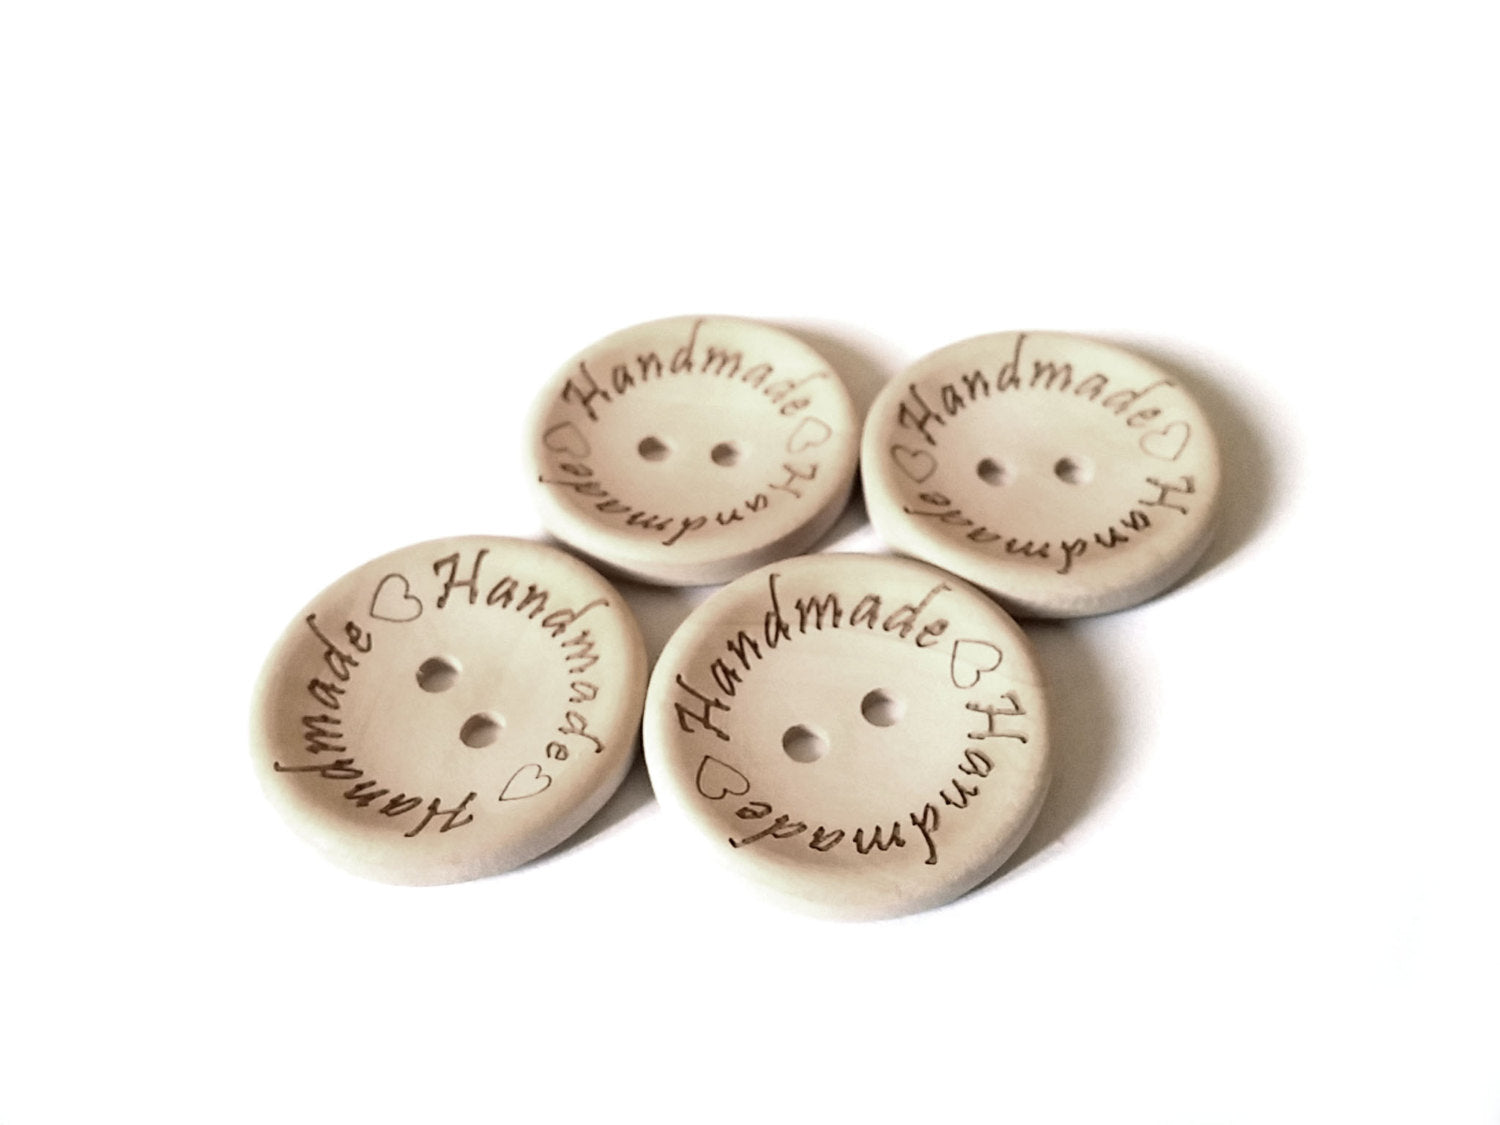 4 Natural unfinished wood button with handmade logo engraved